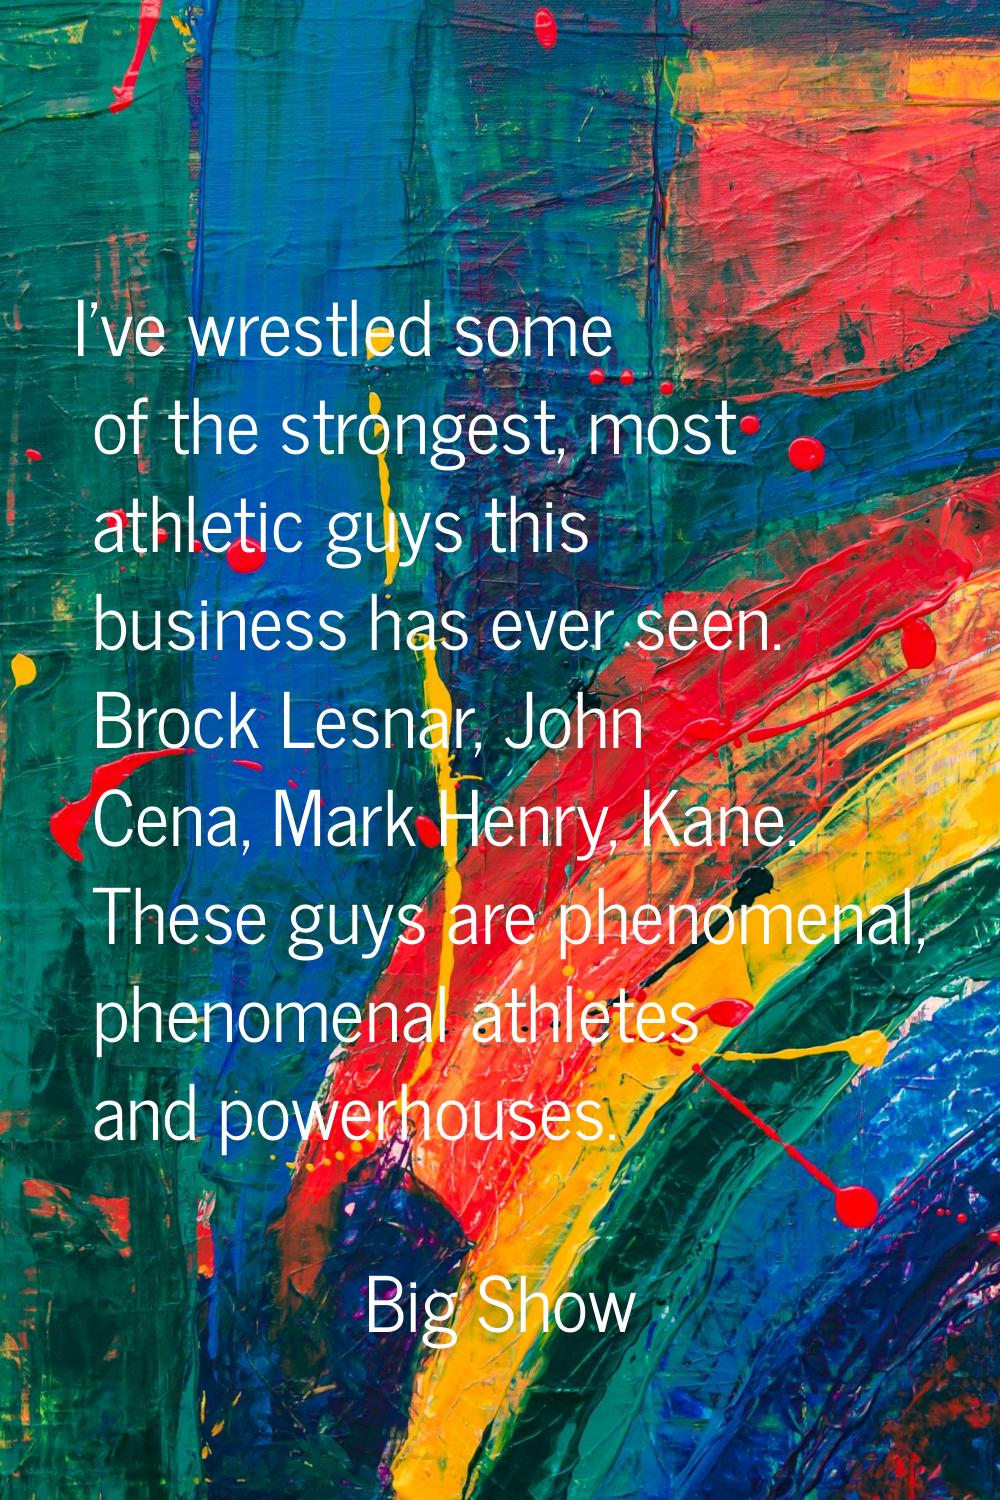 I've wrestled some of the strongest, most athletic guys this business has ever seen. Brock Lesnar, 